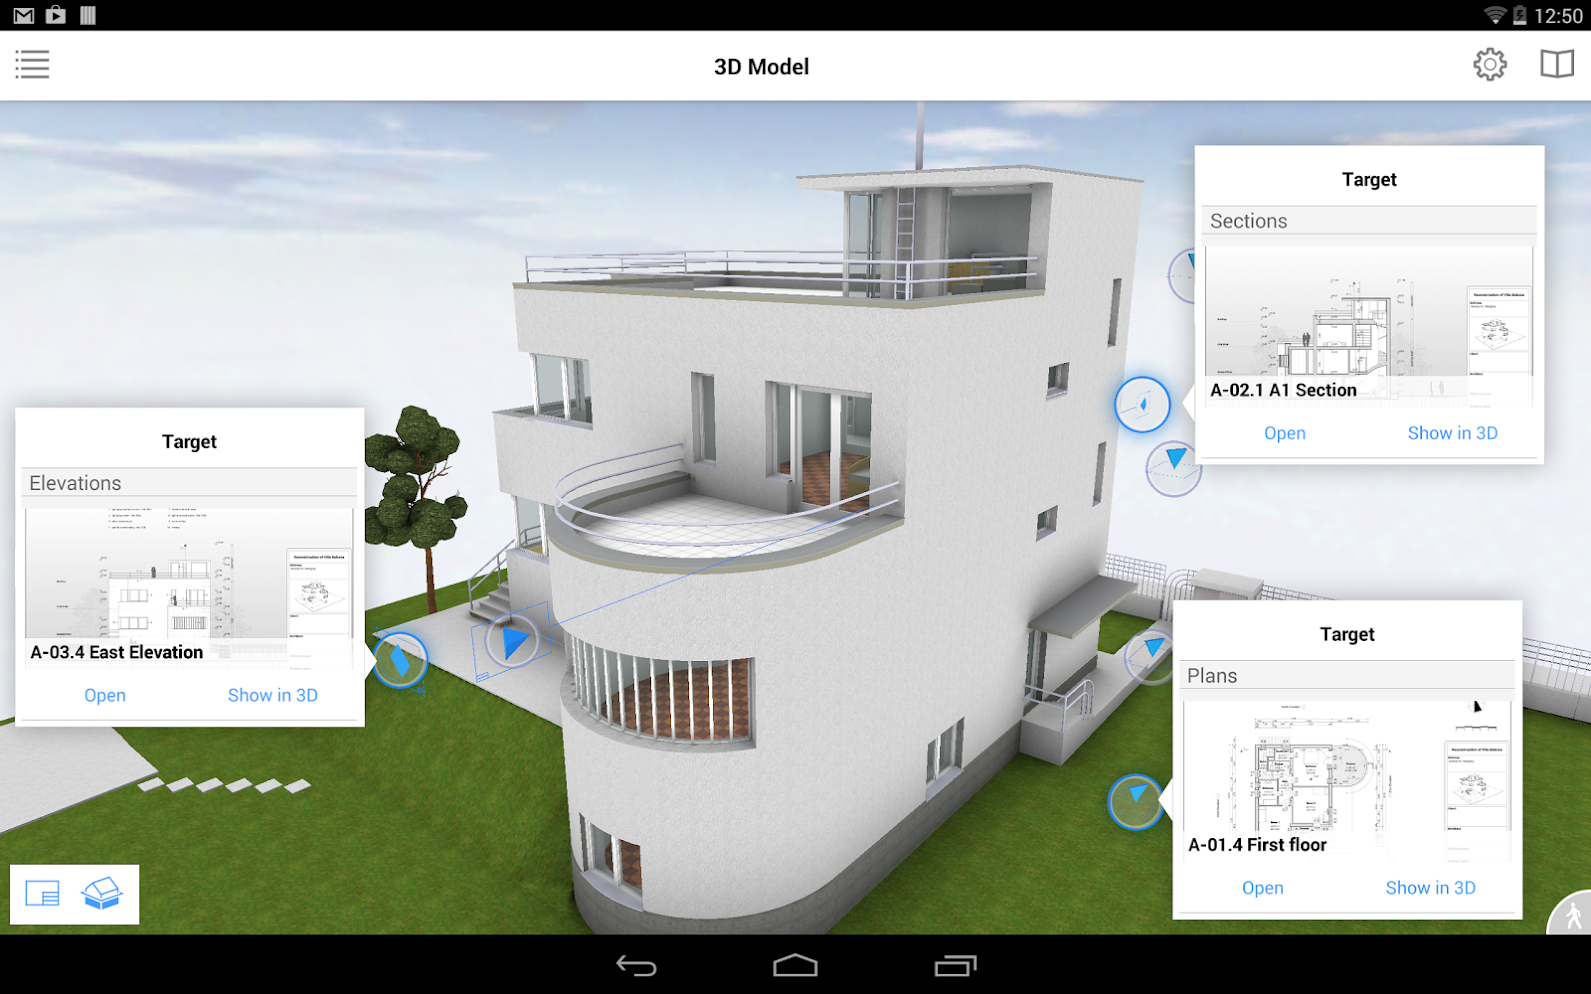 ARCHICAD Software - The BIMx app for iOS and Android devices features the BIMx Hyper-model for 2 and 3D navigation, while also supporting Google Cardboard VR